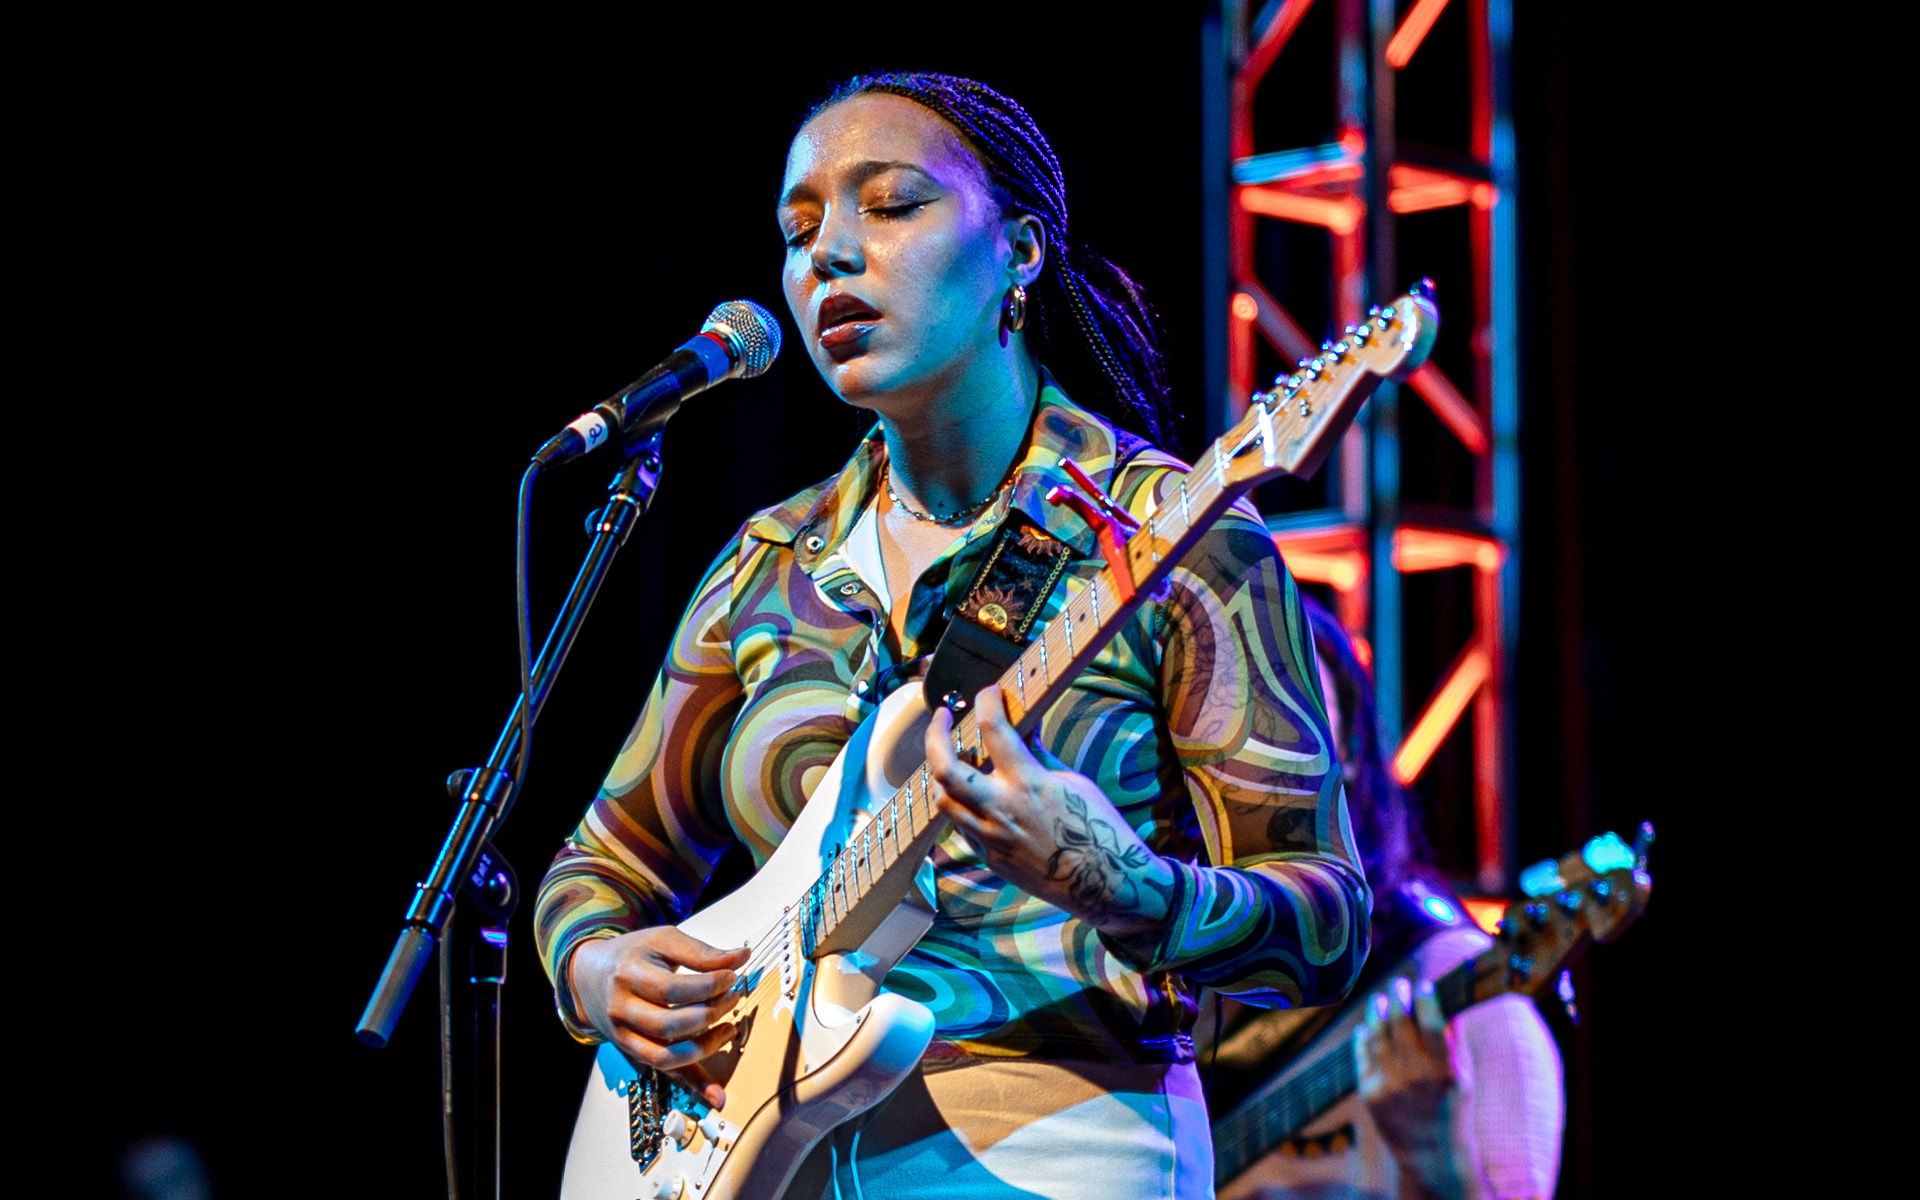 Berklee Online student and musician Julia Pratt is pictured, holding a guitar and performing in concert at the Umbrella Arts Center in Concord, MA, where she opened for Brandi Carlile.